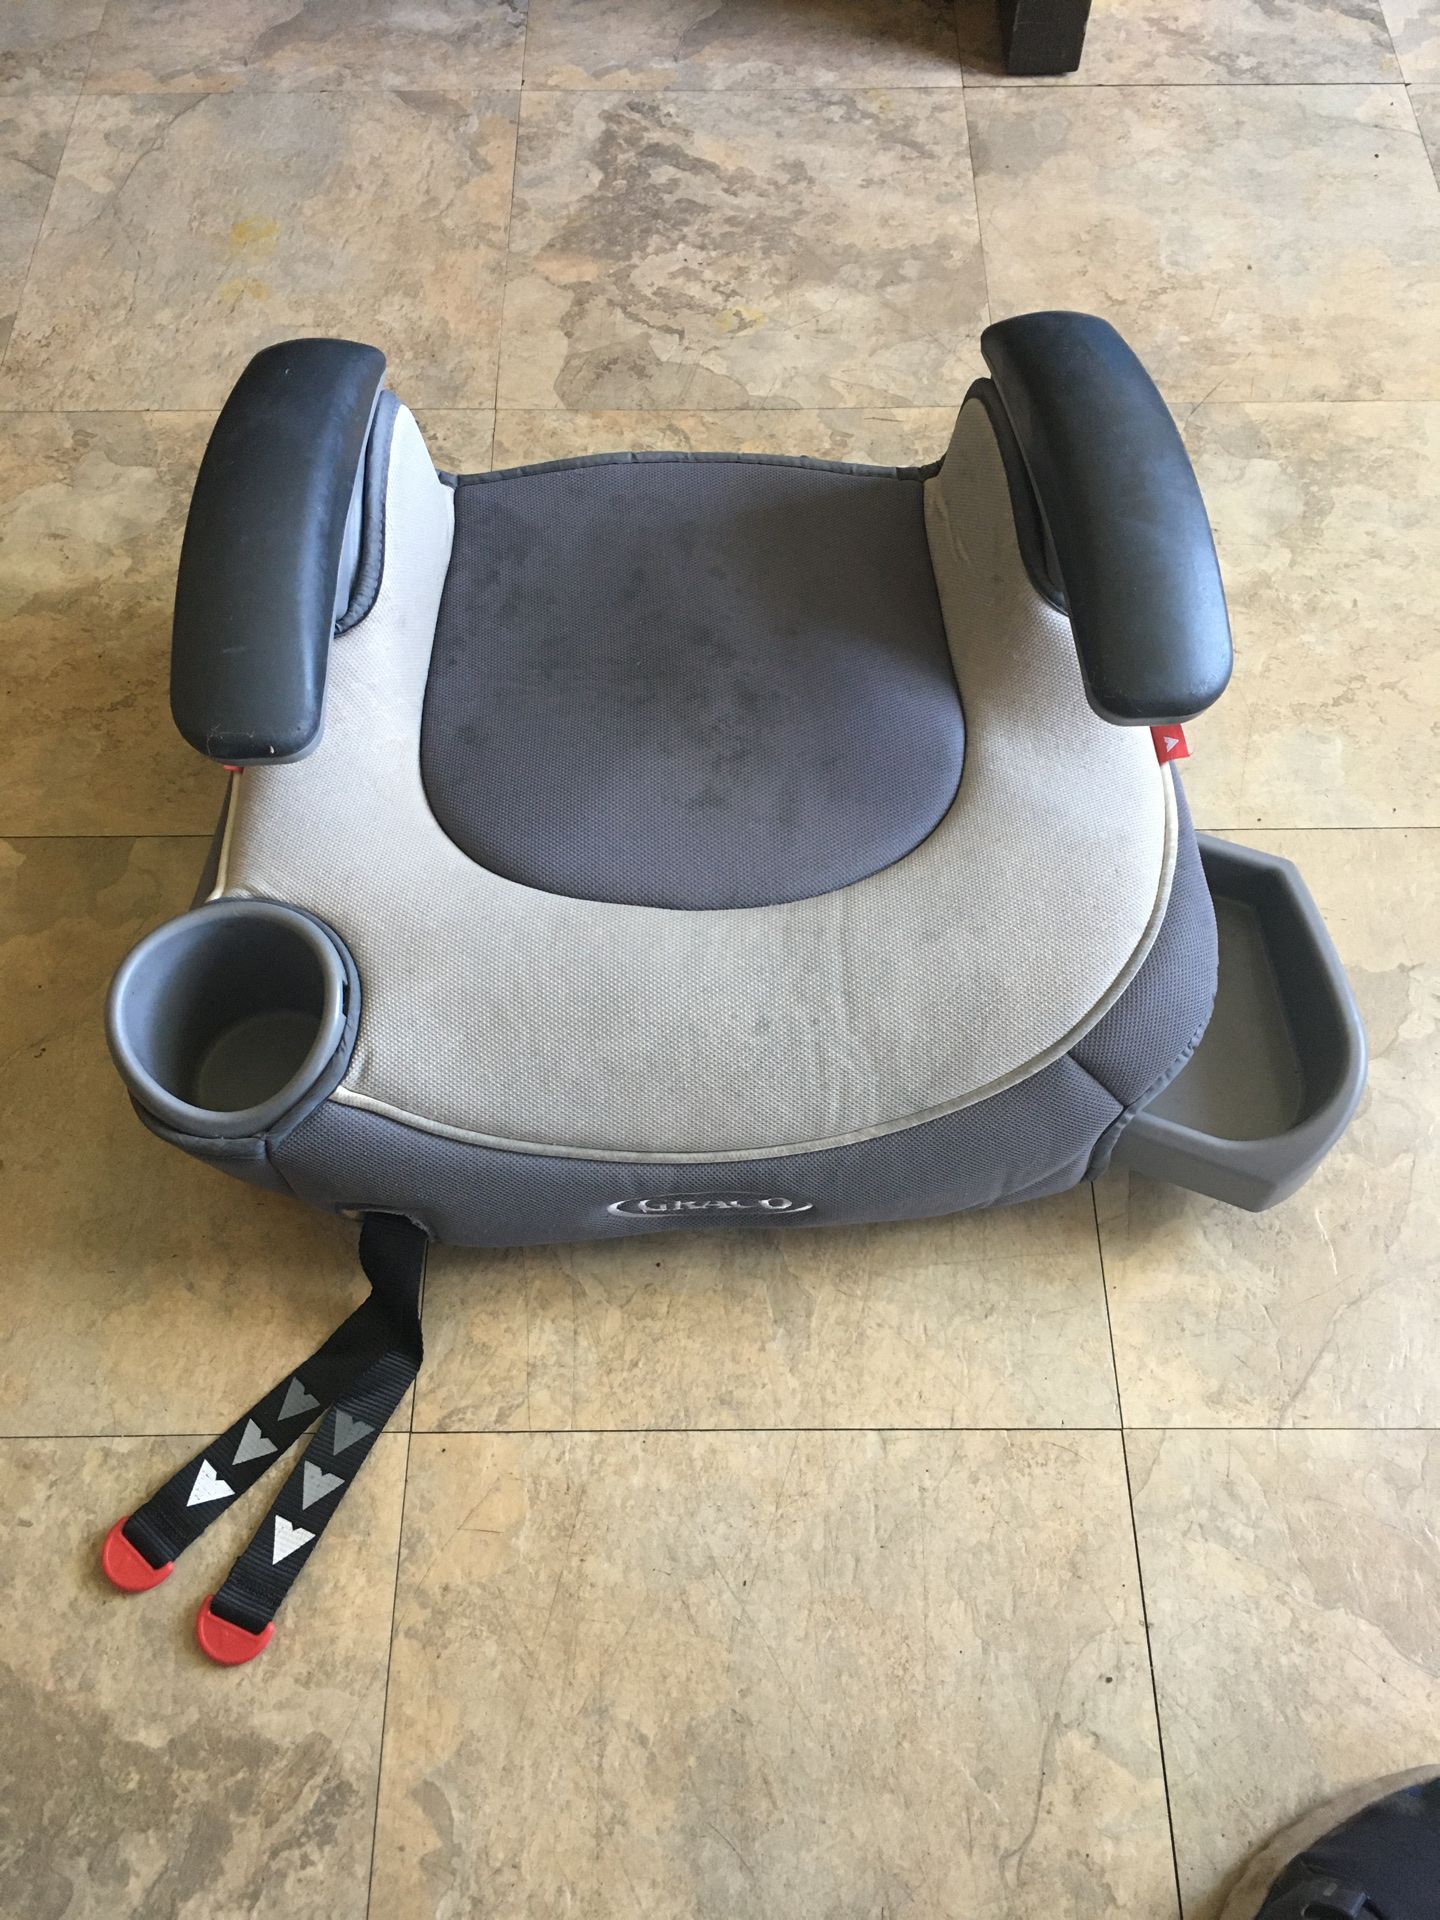 GRACO booster seat